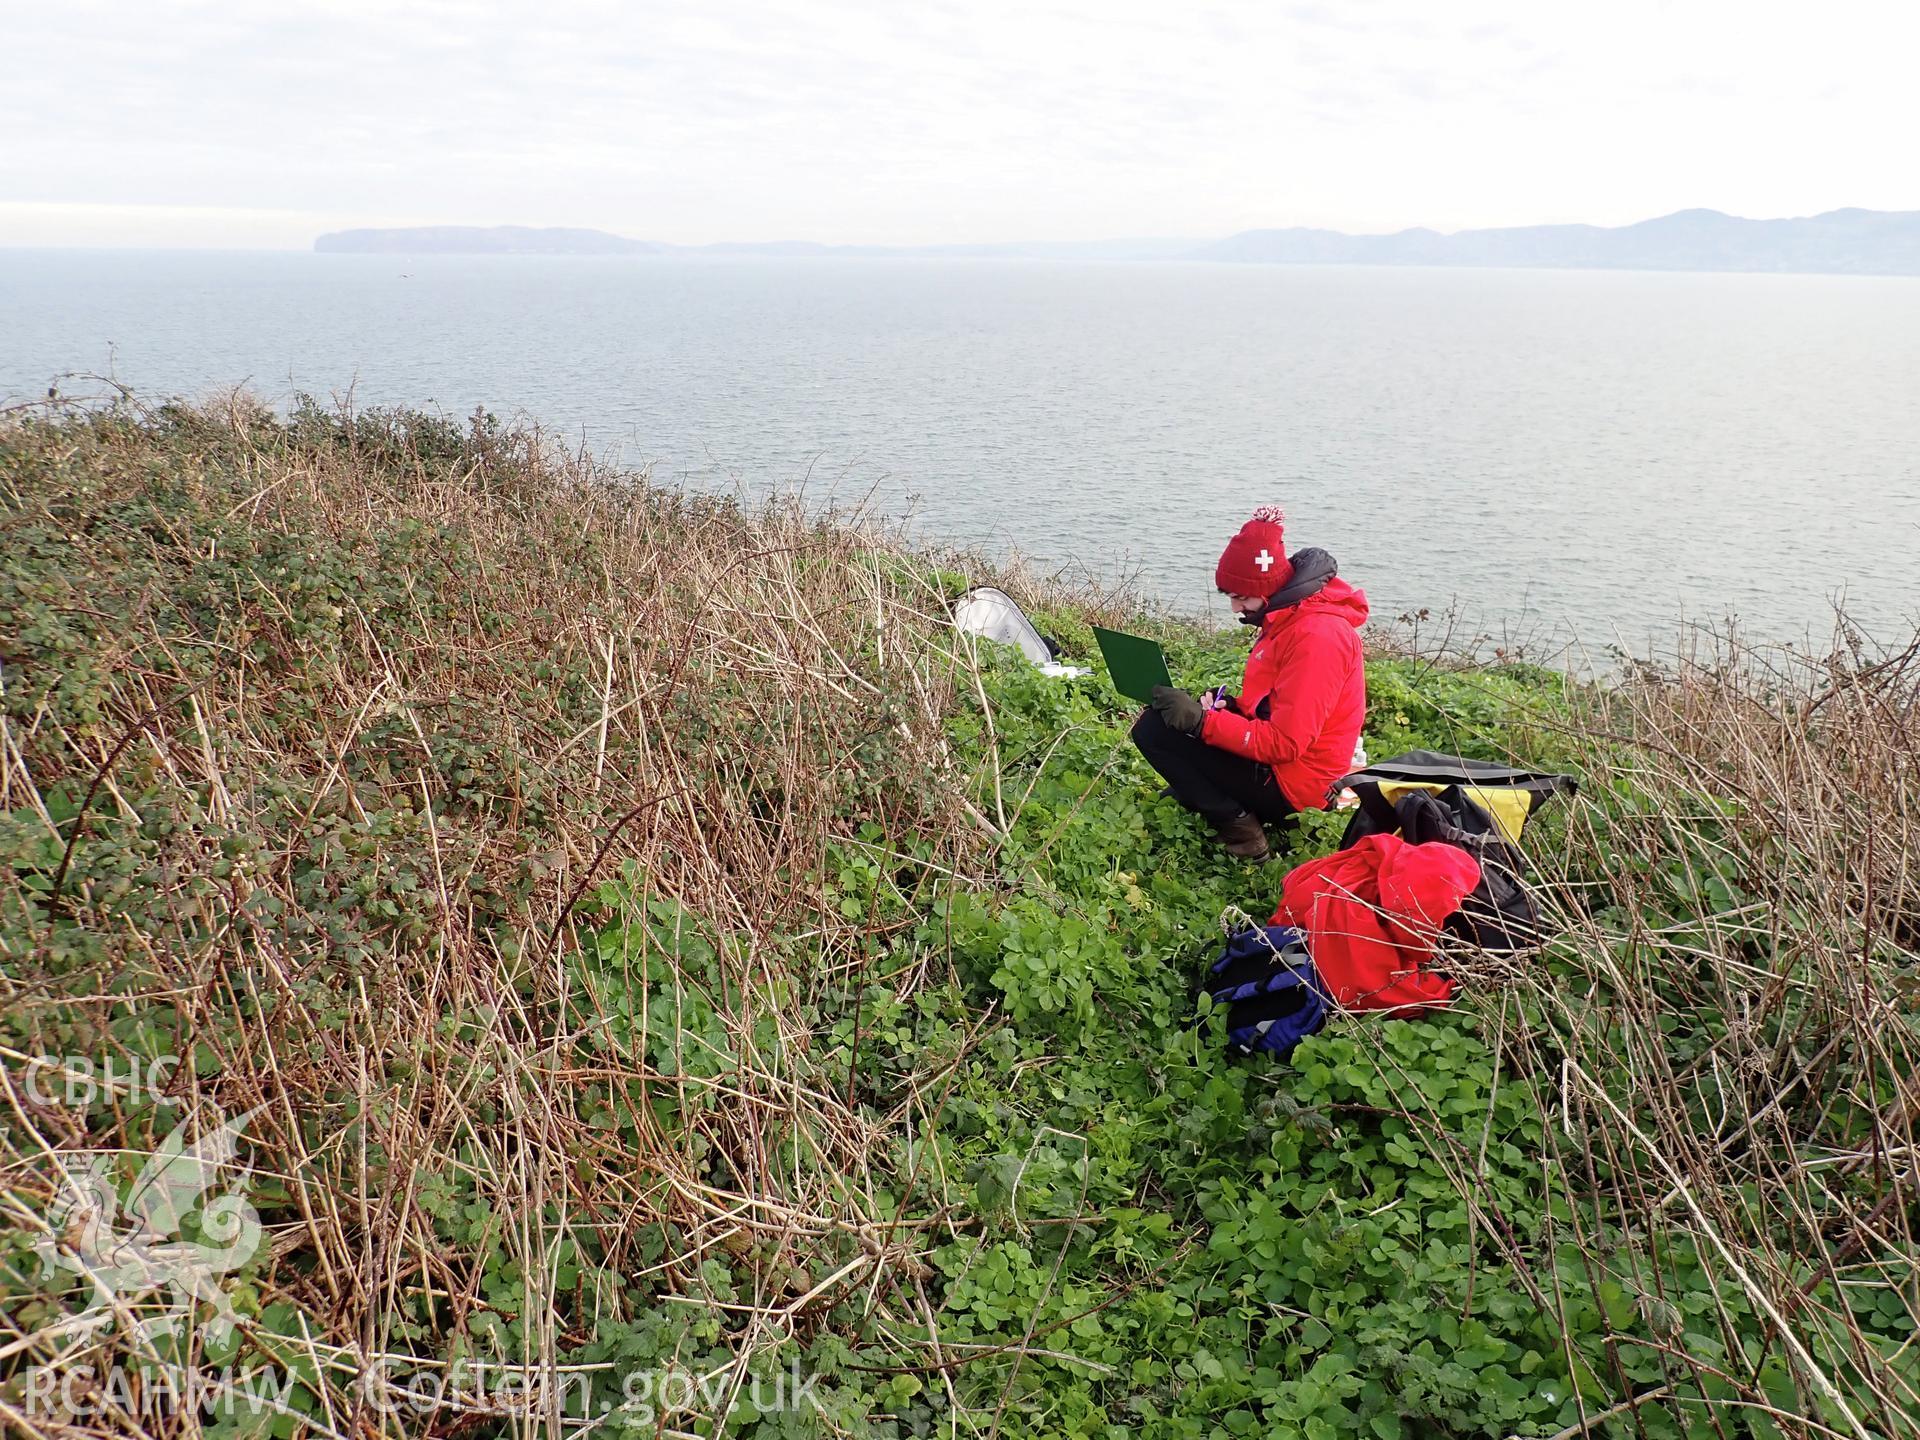 Drone/UAV survey in progress by Dan Hunt on the church on Puffin Island or Ynys Seiriol, 26 November 2018 for the CHERISH Project. ? Crown: CHERISH PROJECT 2018. Produced with EU funds through the Ireland Wales Co-operation Programme 2014-2020. All material made freely available through the Open Government Licence.